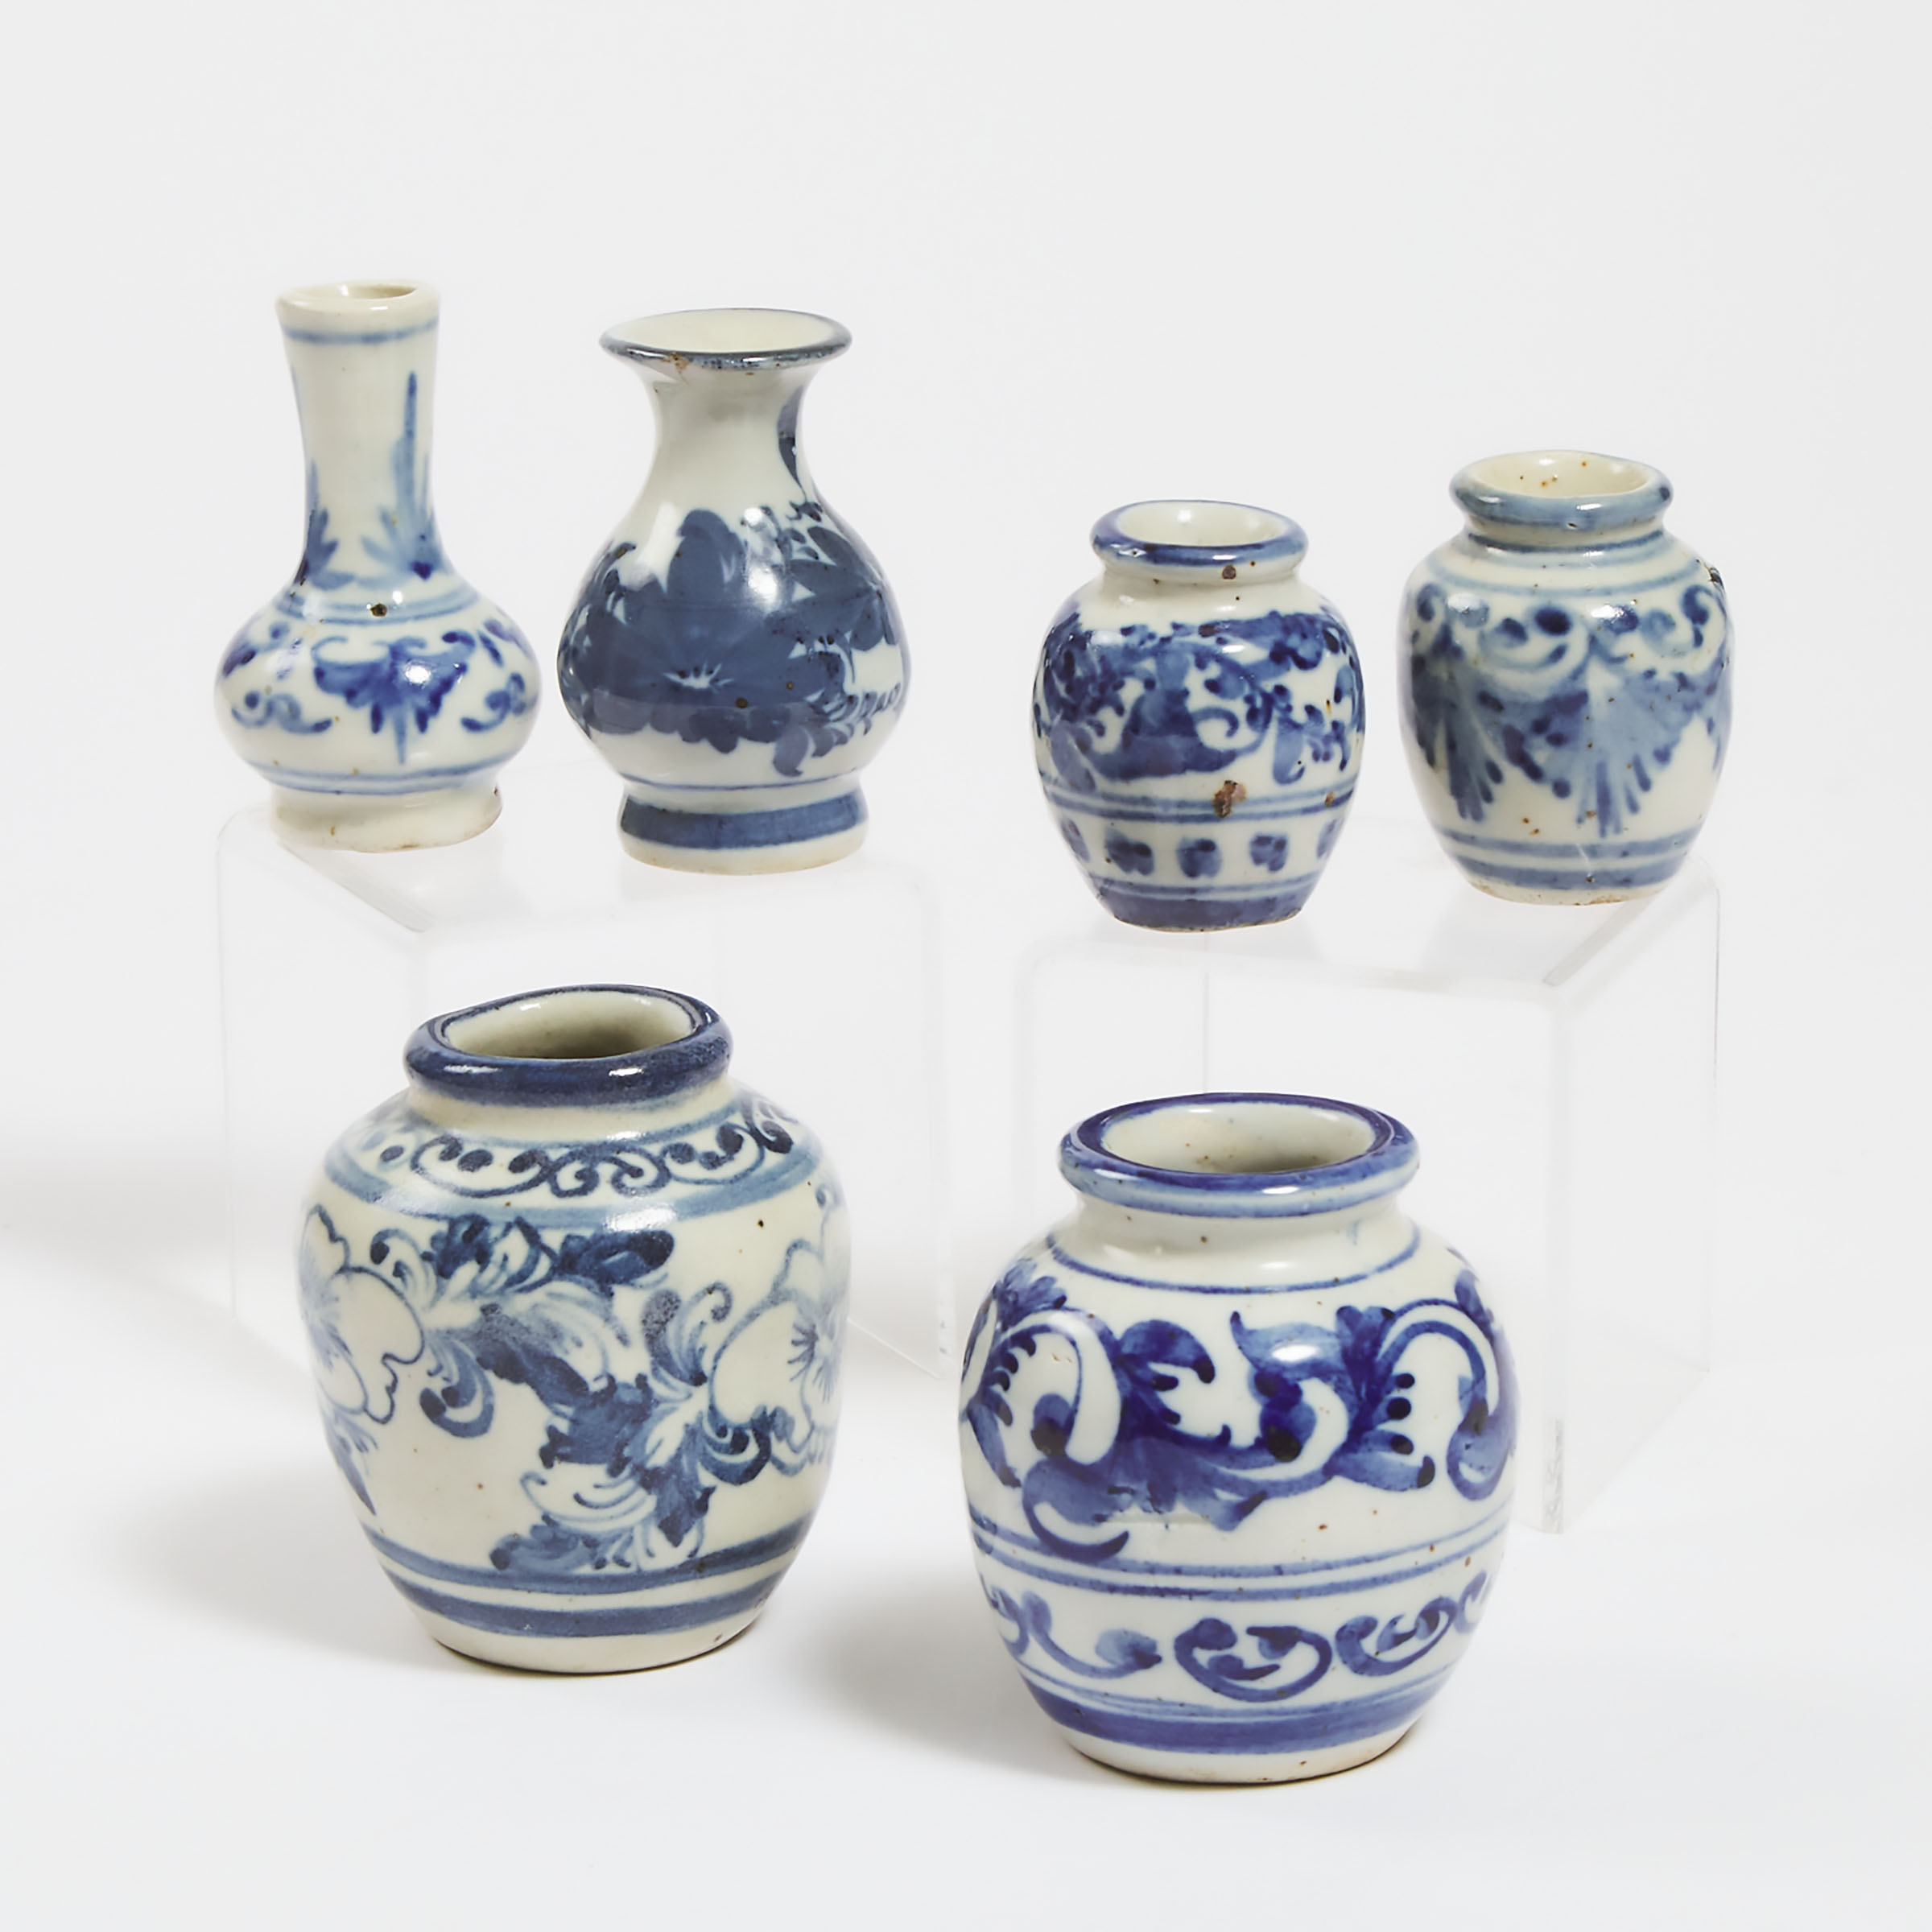 A Group of Six Ming-Style Blue and White Jarlets and Vases